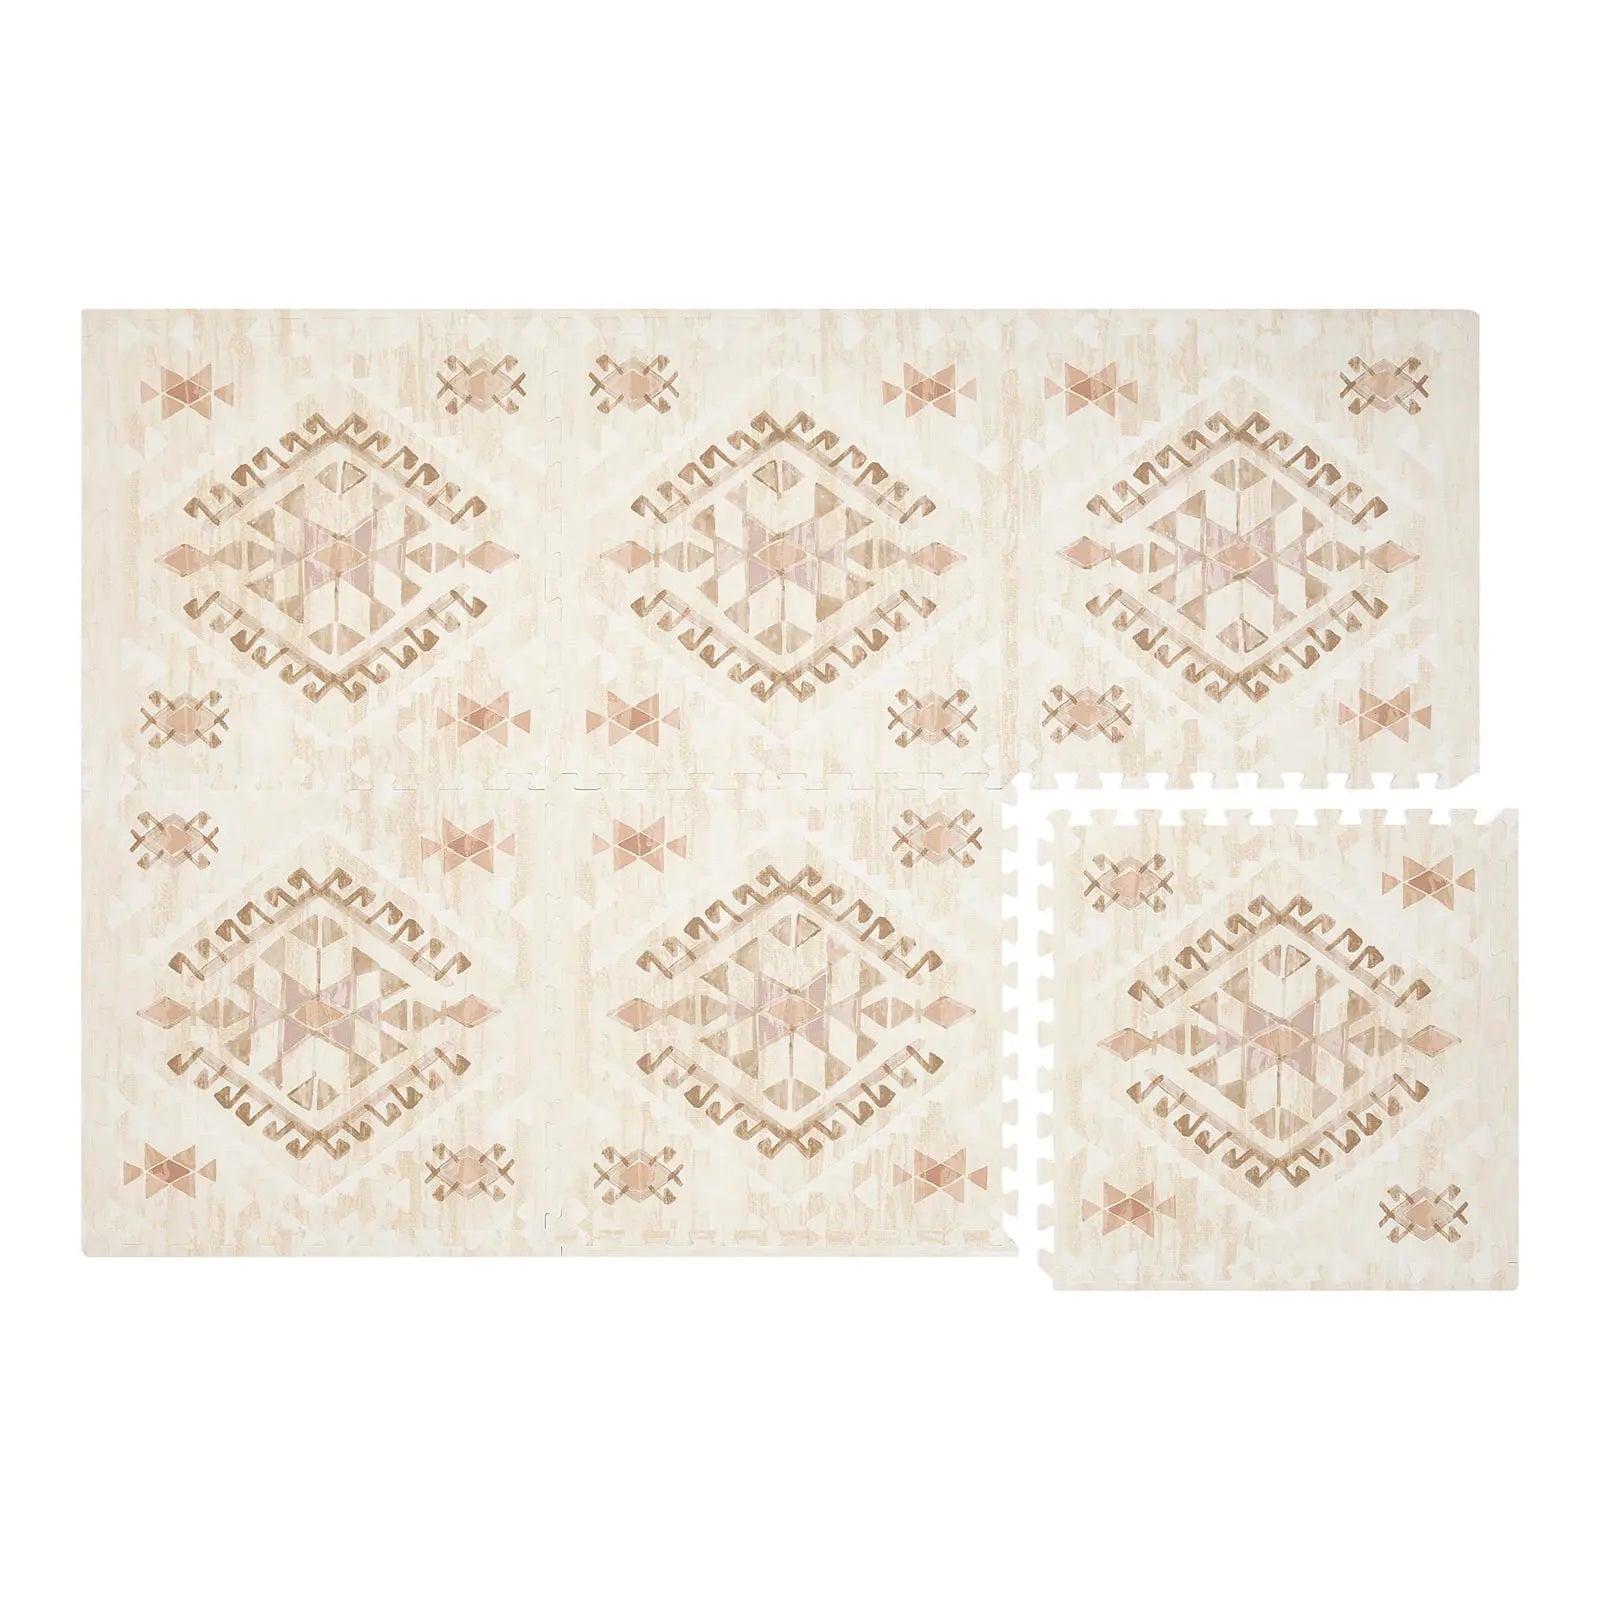 Nalla Mojave neutral beige brown and pink boho print play mat shown in size 4x6 with 1 tile exposed